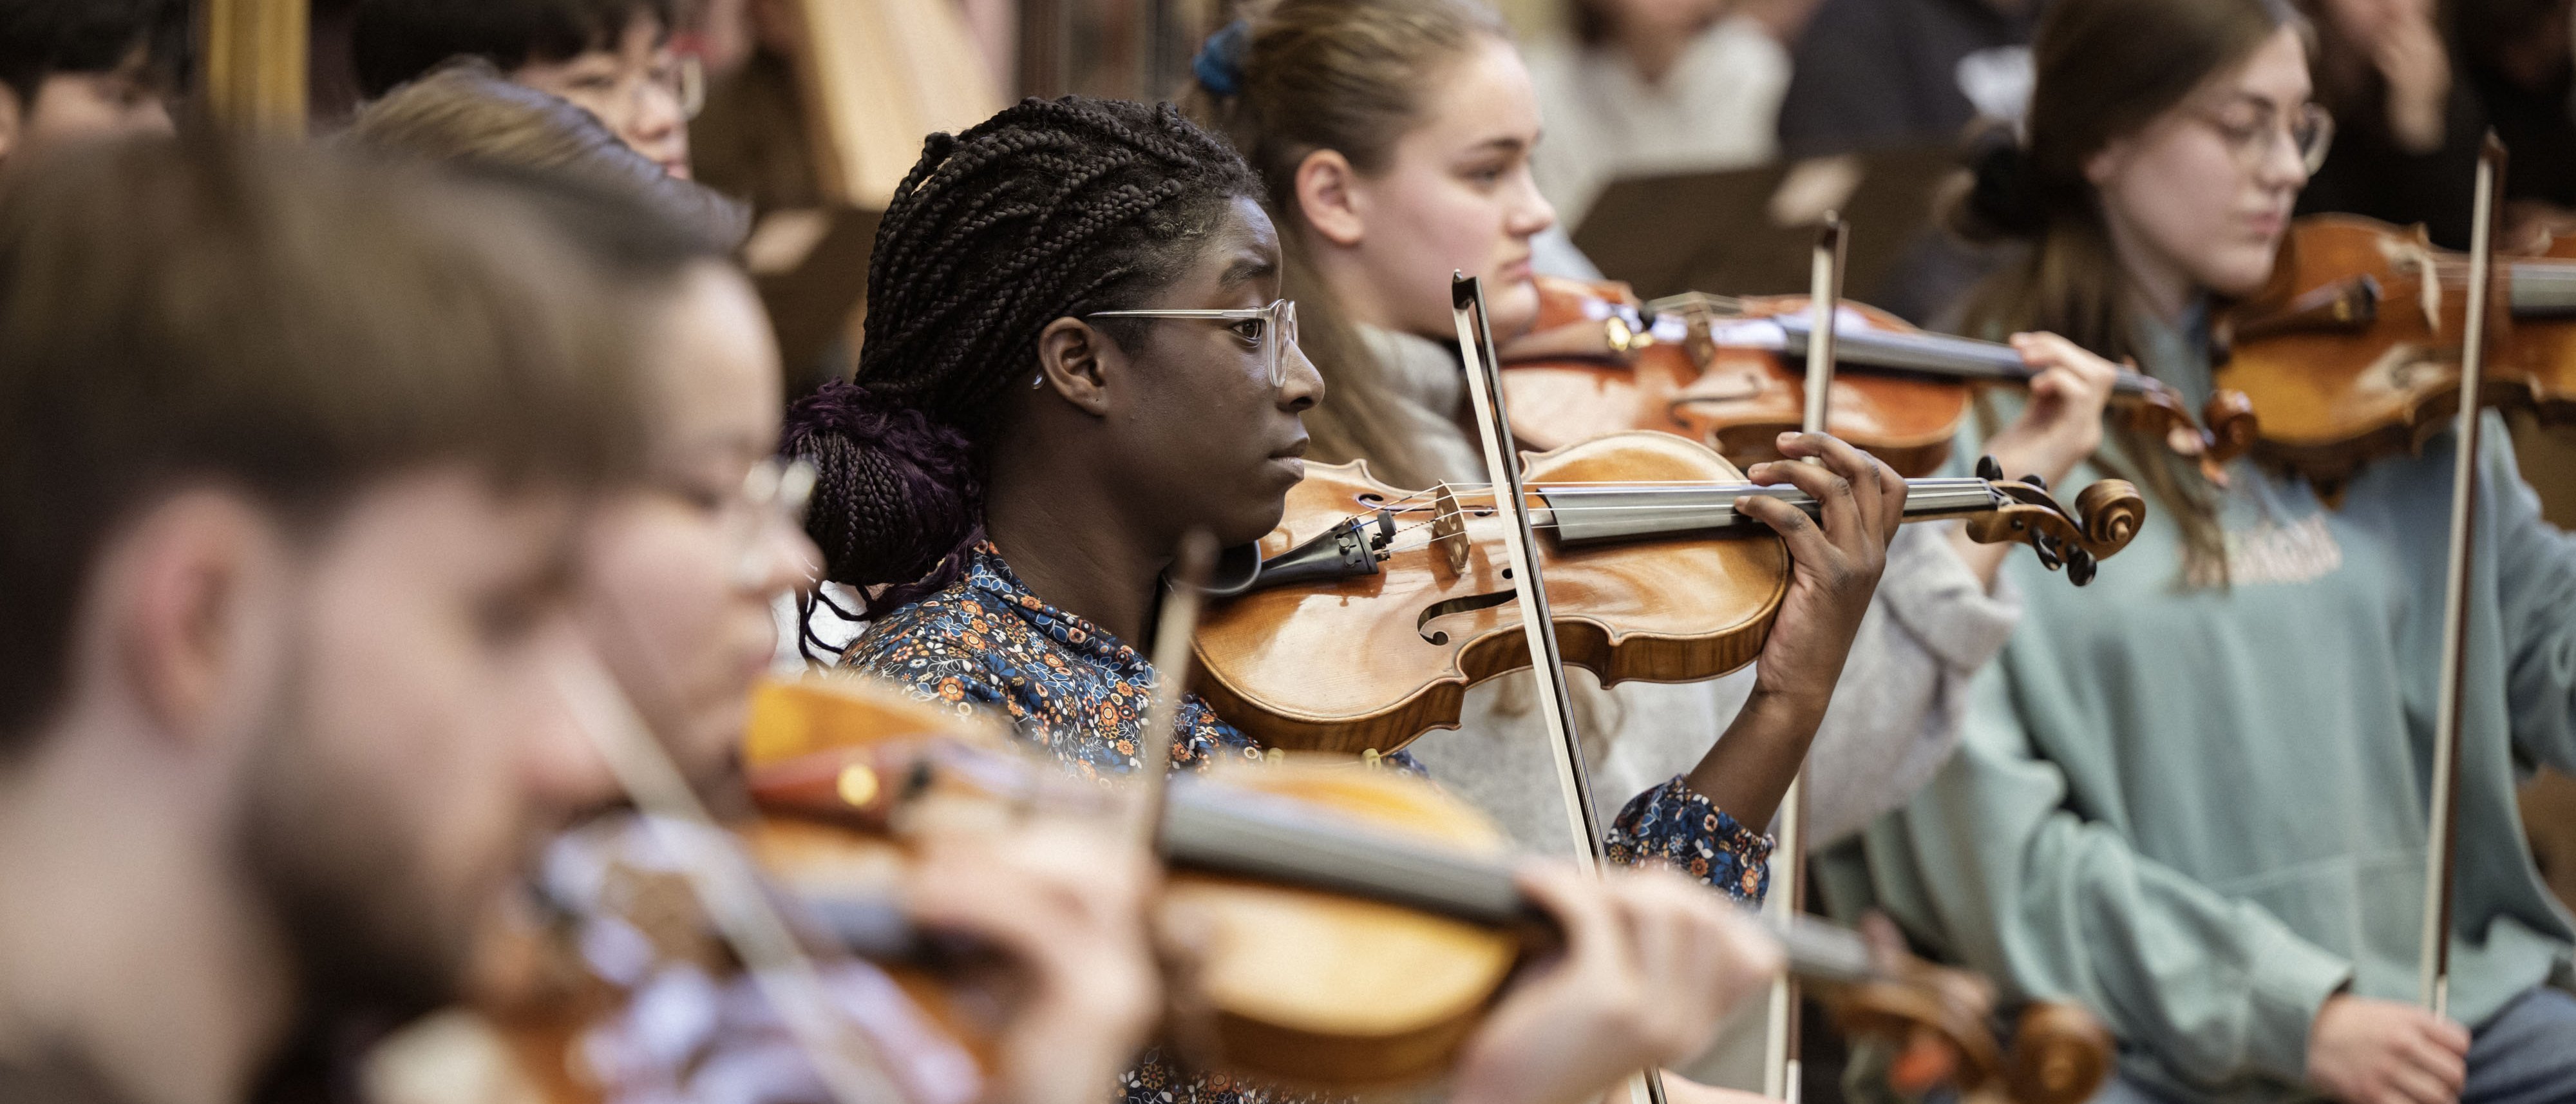 Young people making music with violins